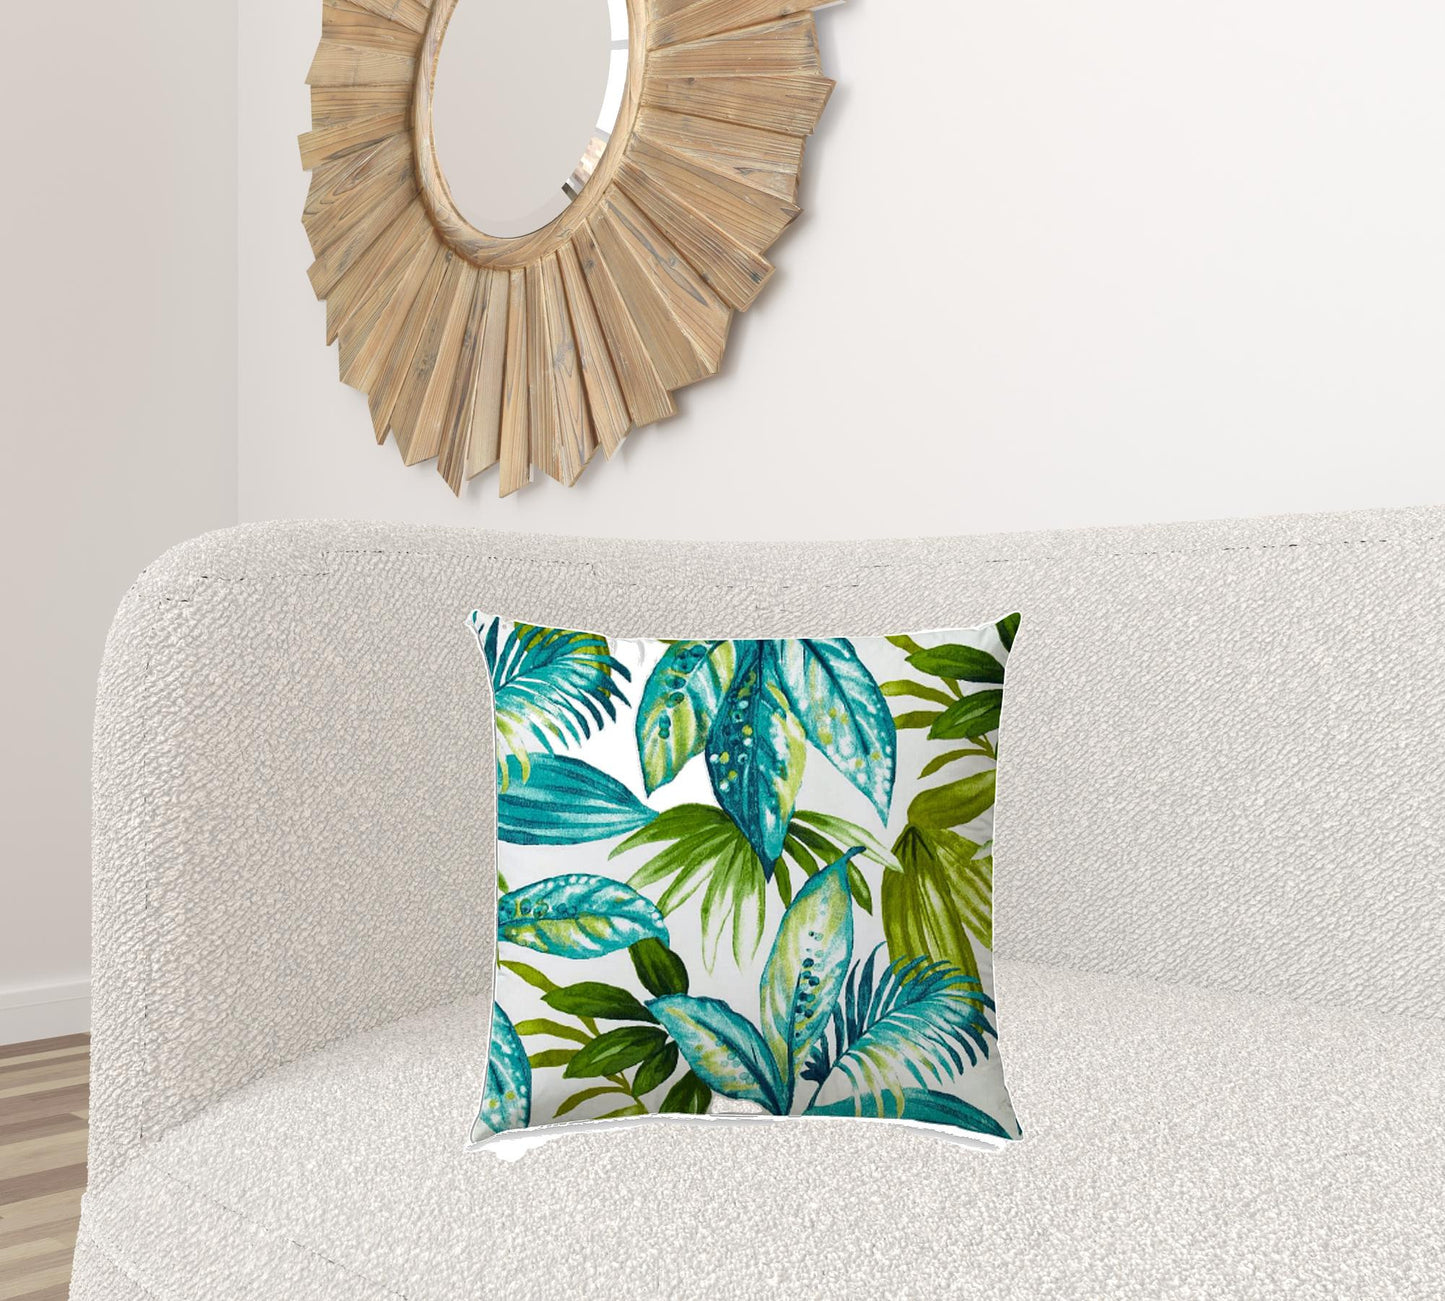 20" X 20" Teal And White Blown Seam Tropical Throw Indoor Outdoor Pillow